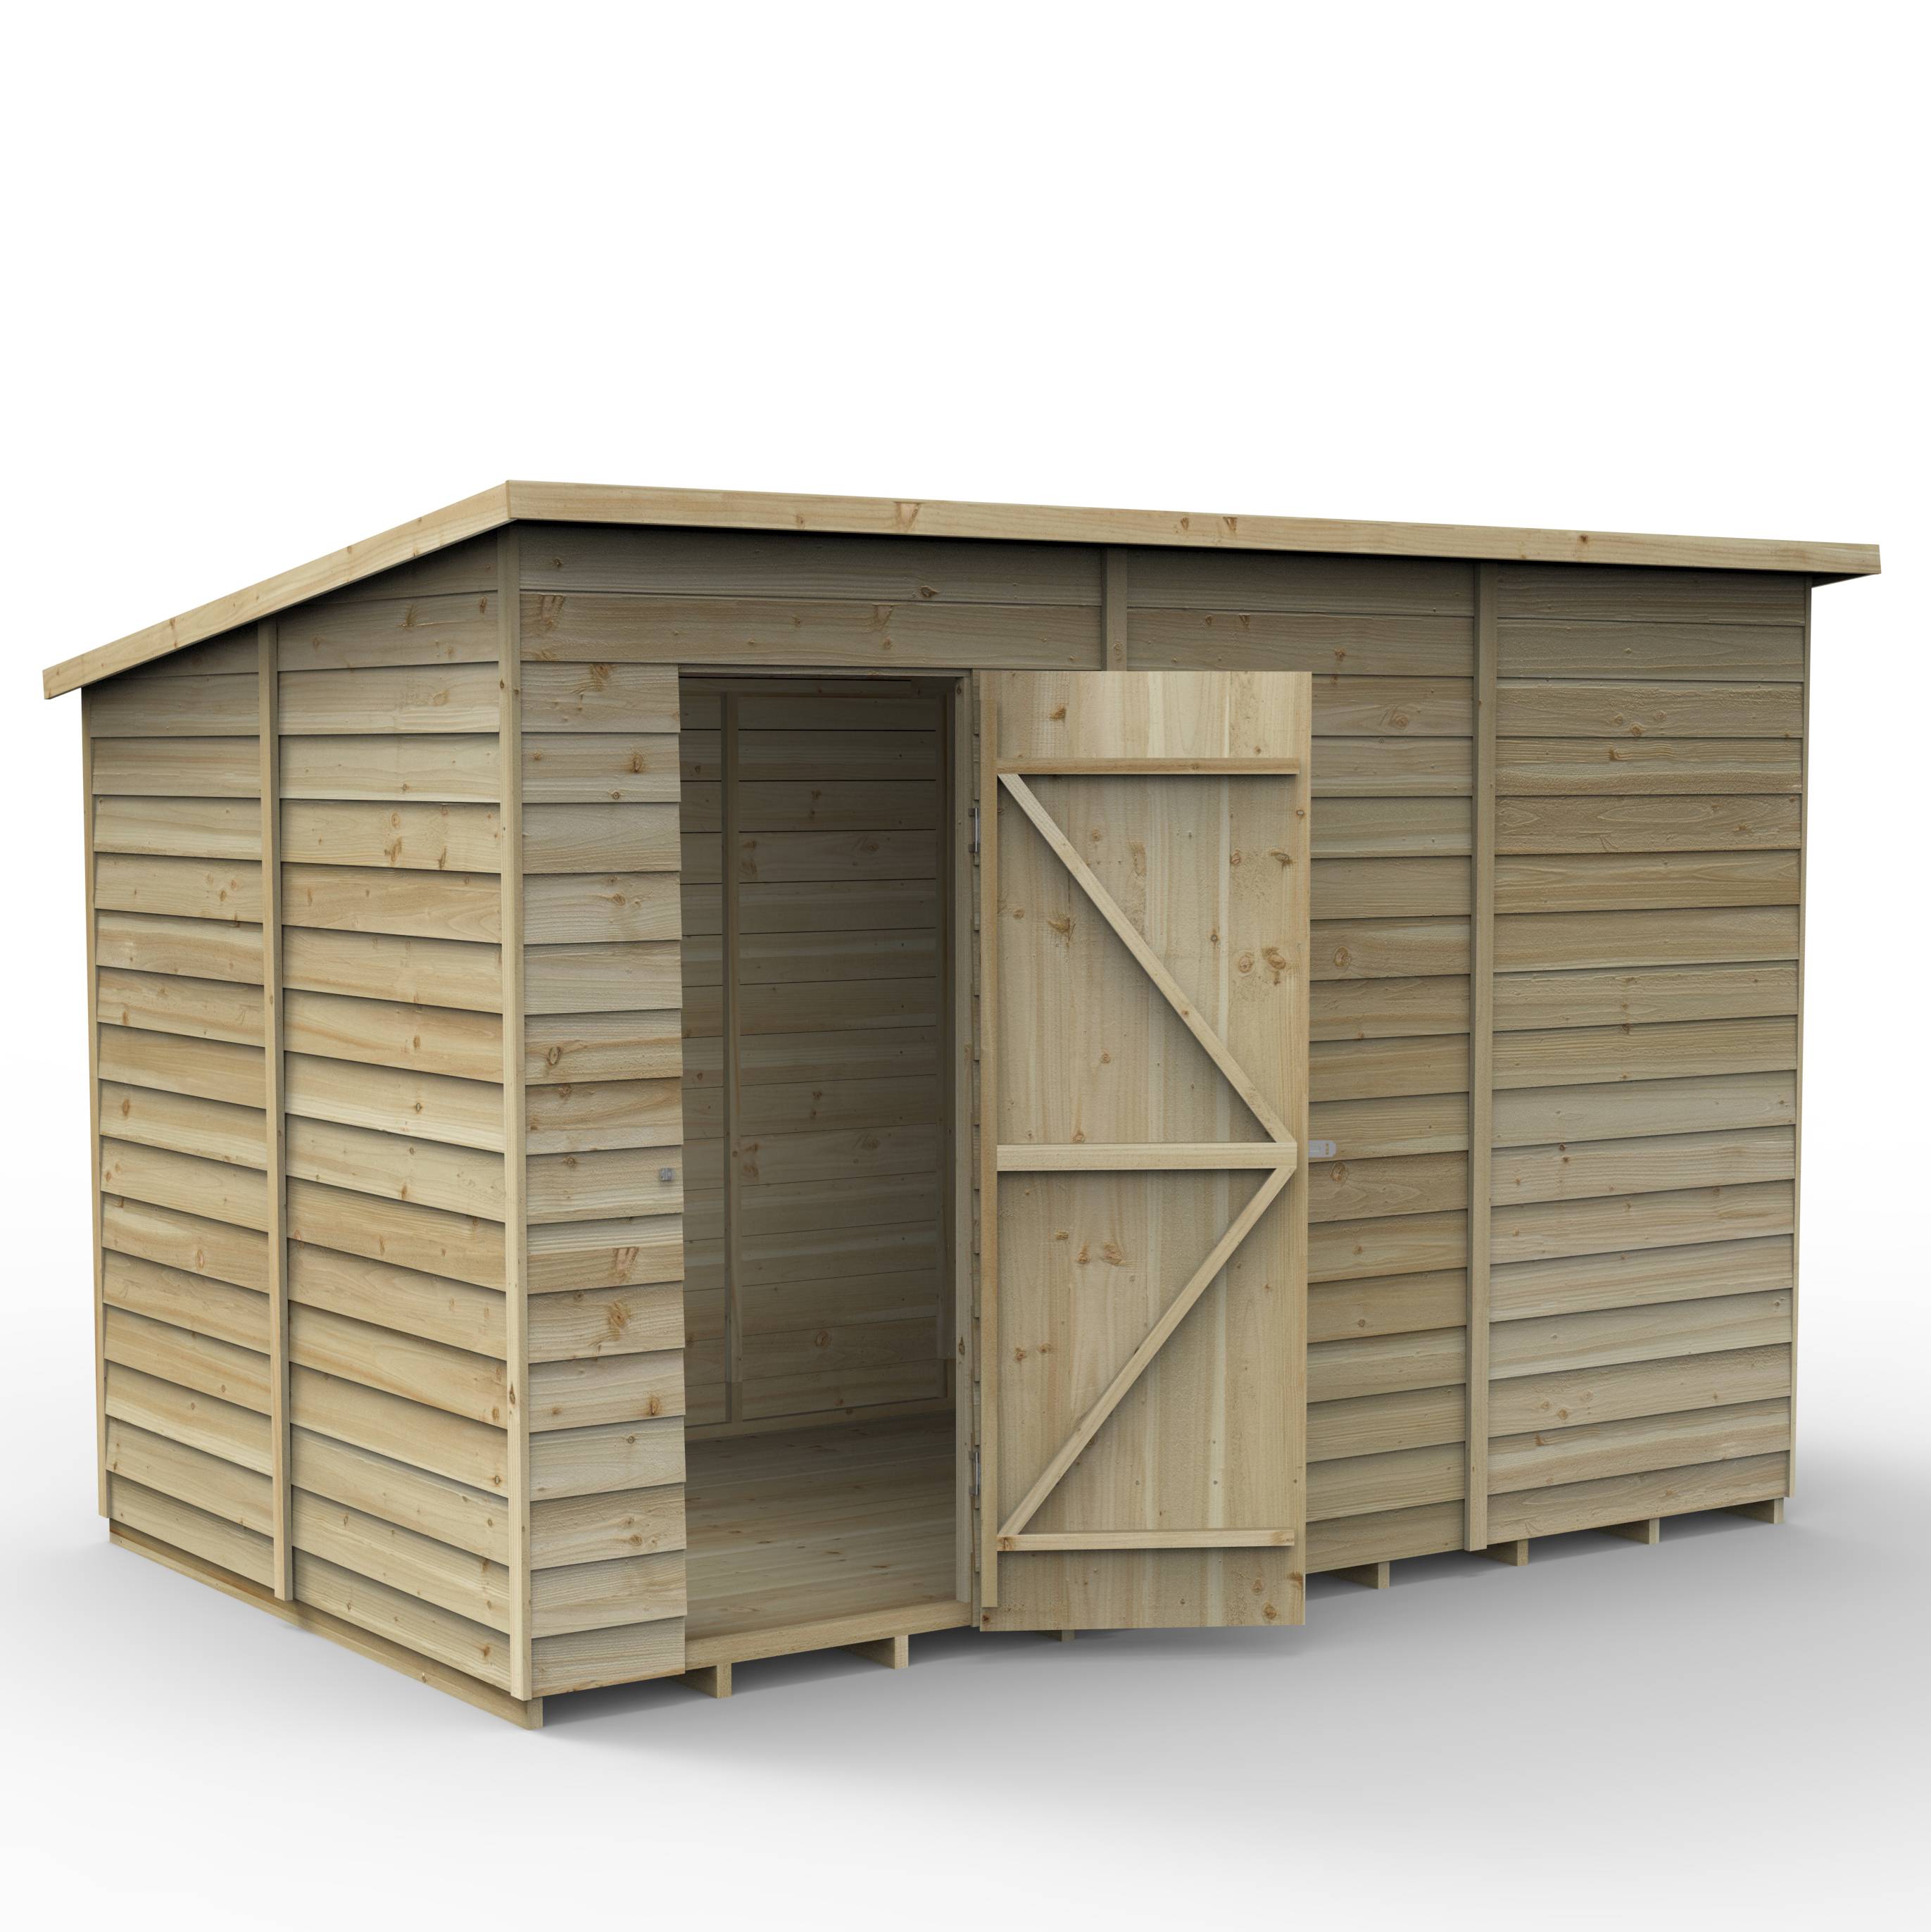 Image of Forest Garden 10x6 4Life Overlap Pressure Treated Pent Shed (No Window)